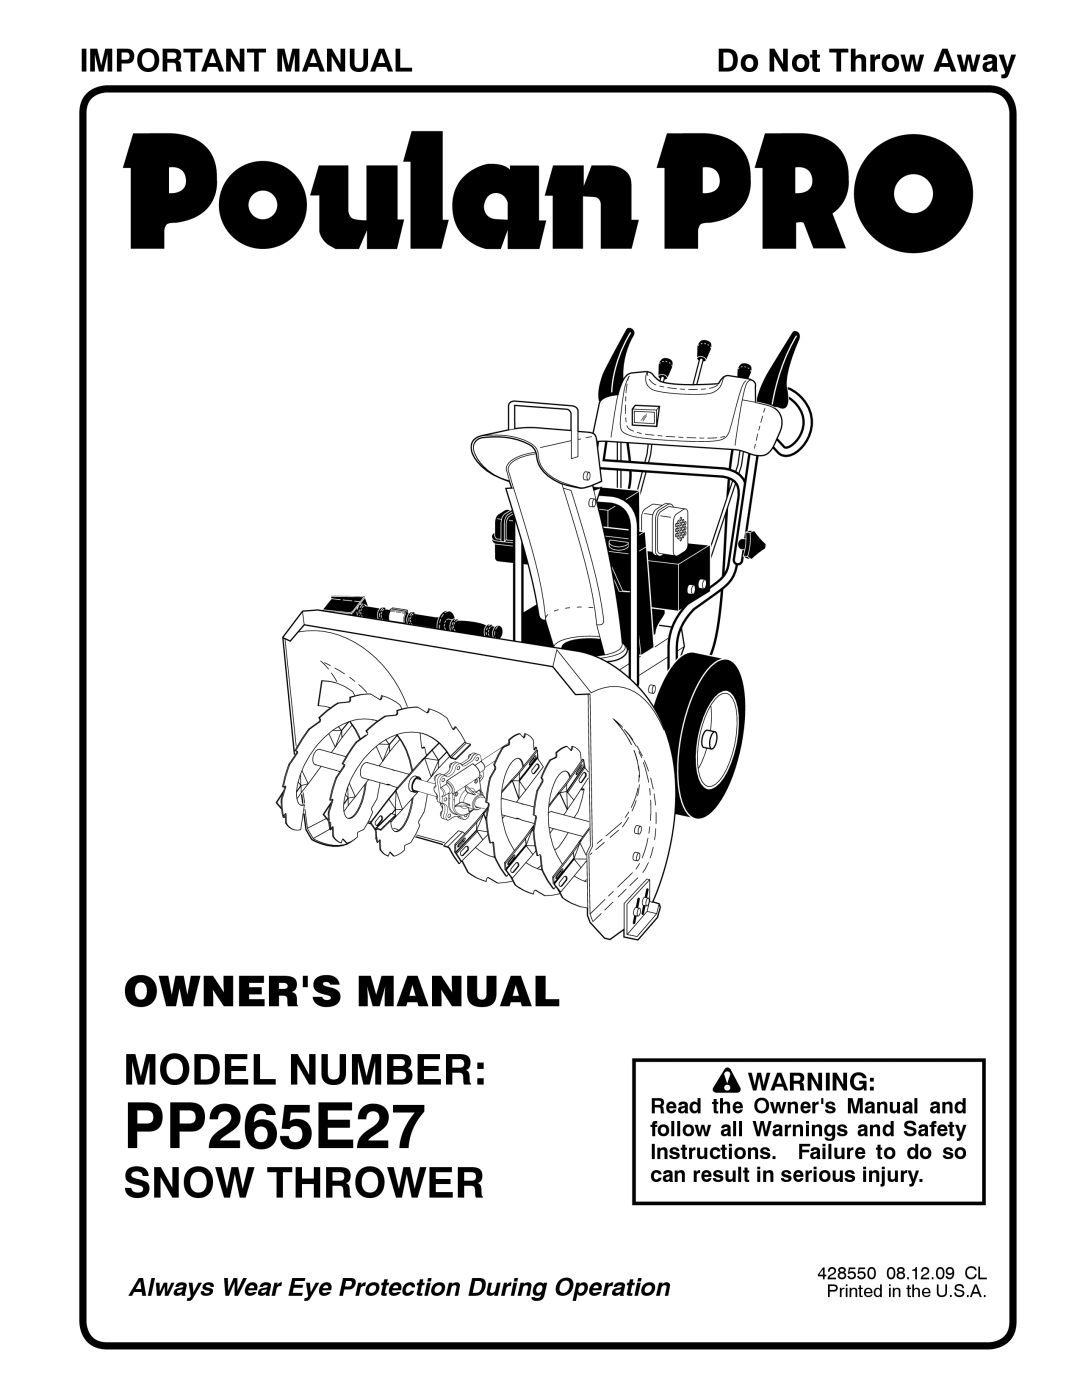 Poulan 96198002800 owner manual Owners Manual Model Number, Snow Thrower, Important Manual, PP265E27, Do Not Throw Away 